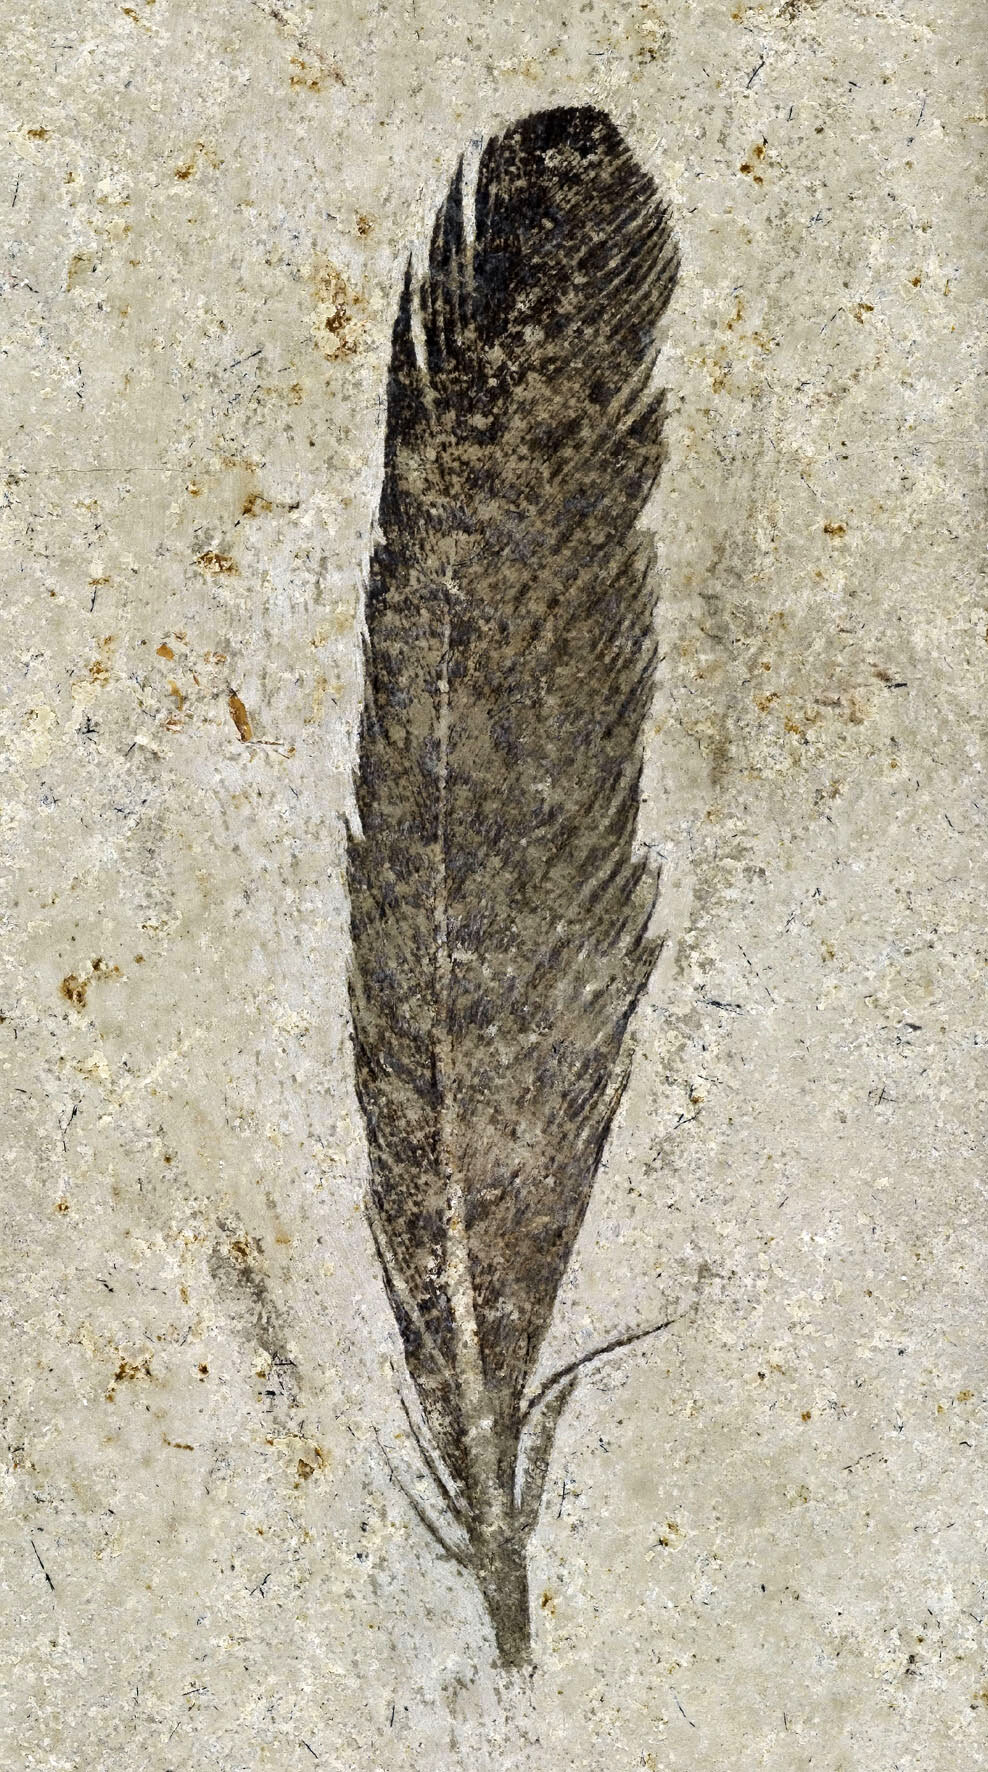 Dinosaur feather study debunked: Overwhelming evidence supports Jurassic  fossil does belong to Archaeopteryx